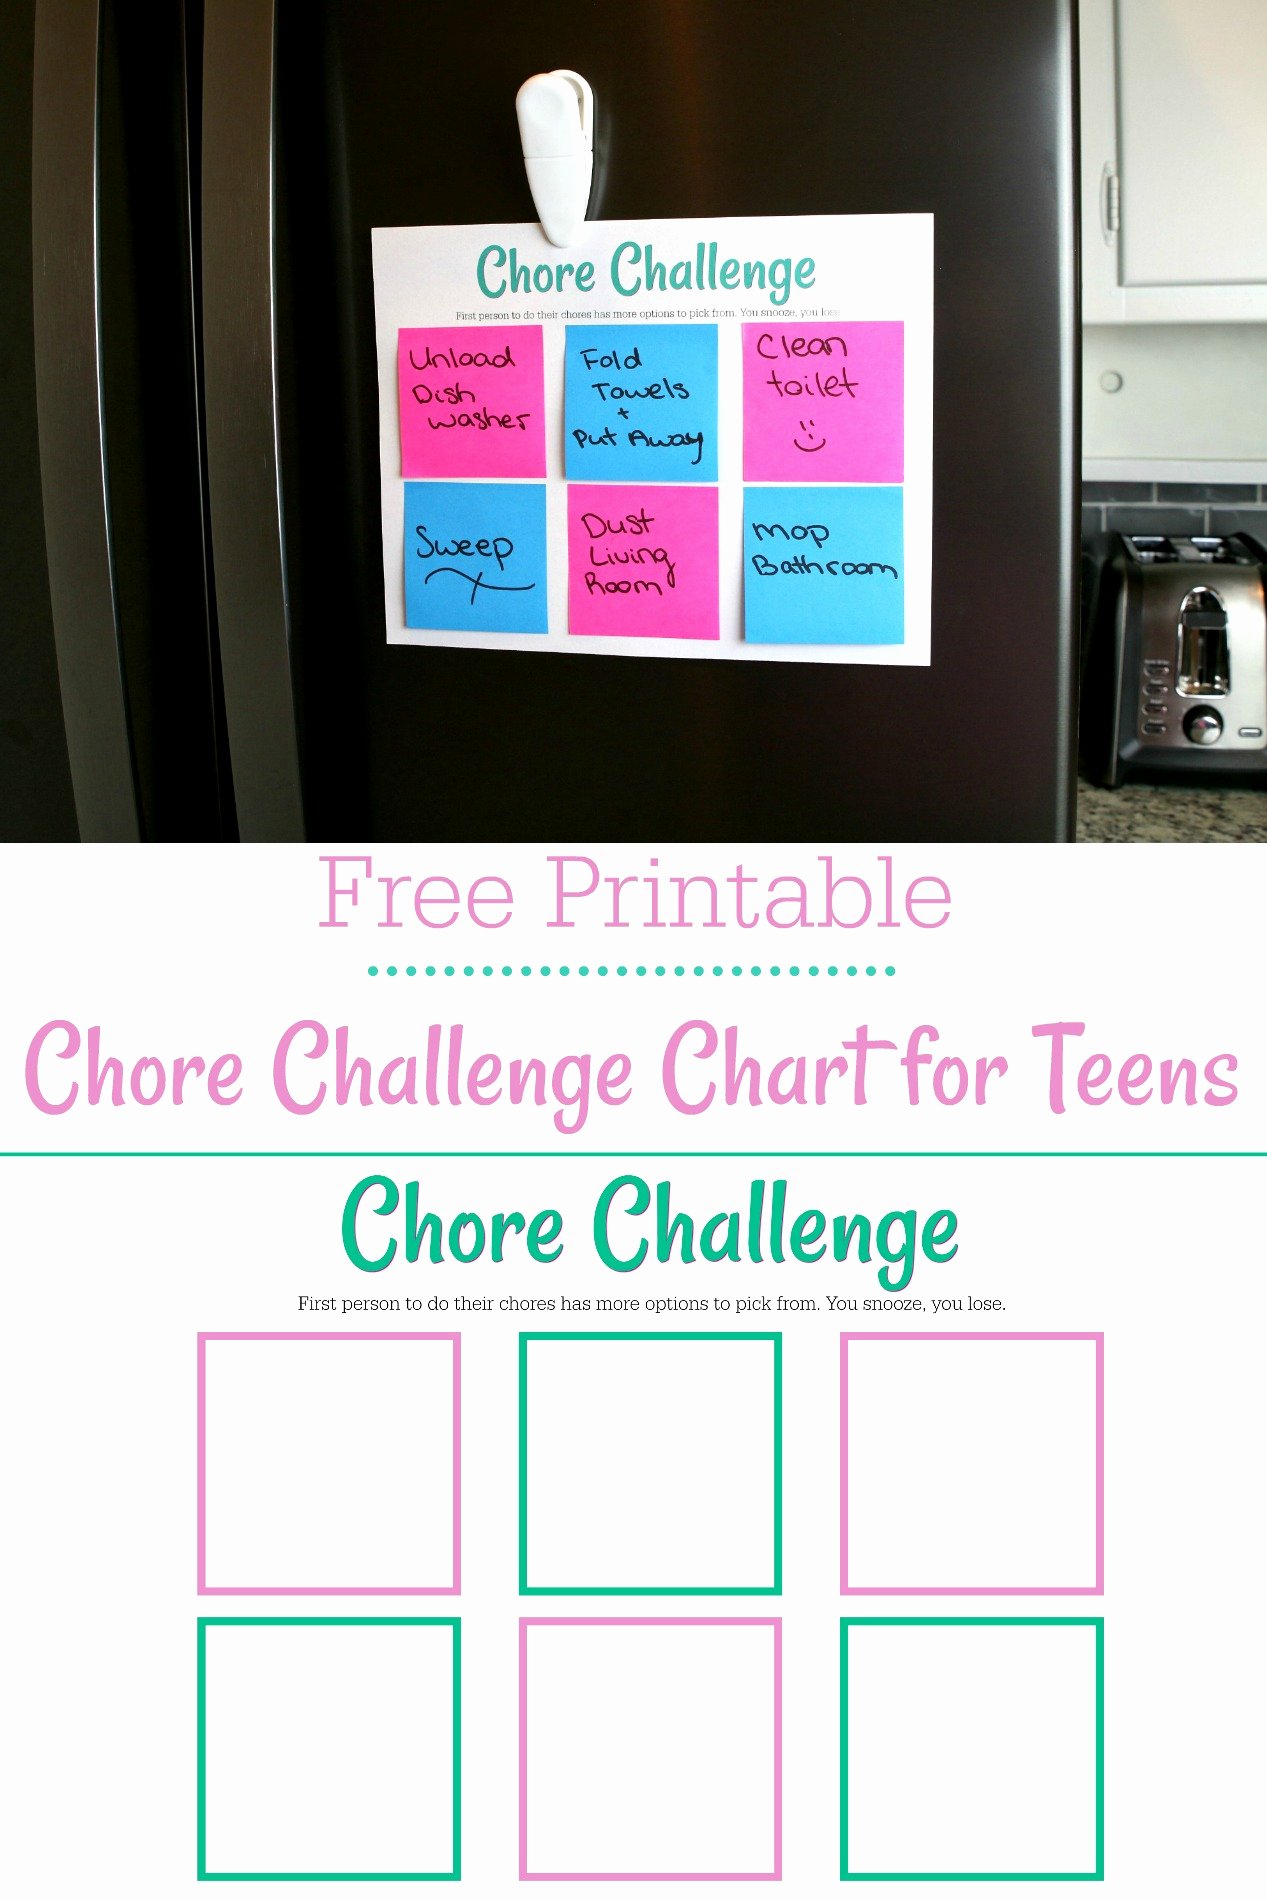 Chore Chart for Teens Awesome Free Printable Chore Chart for Teens Life Family Joy